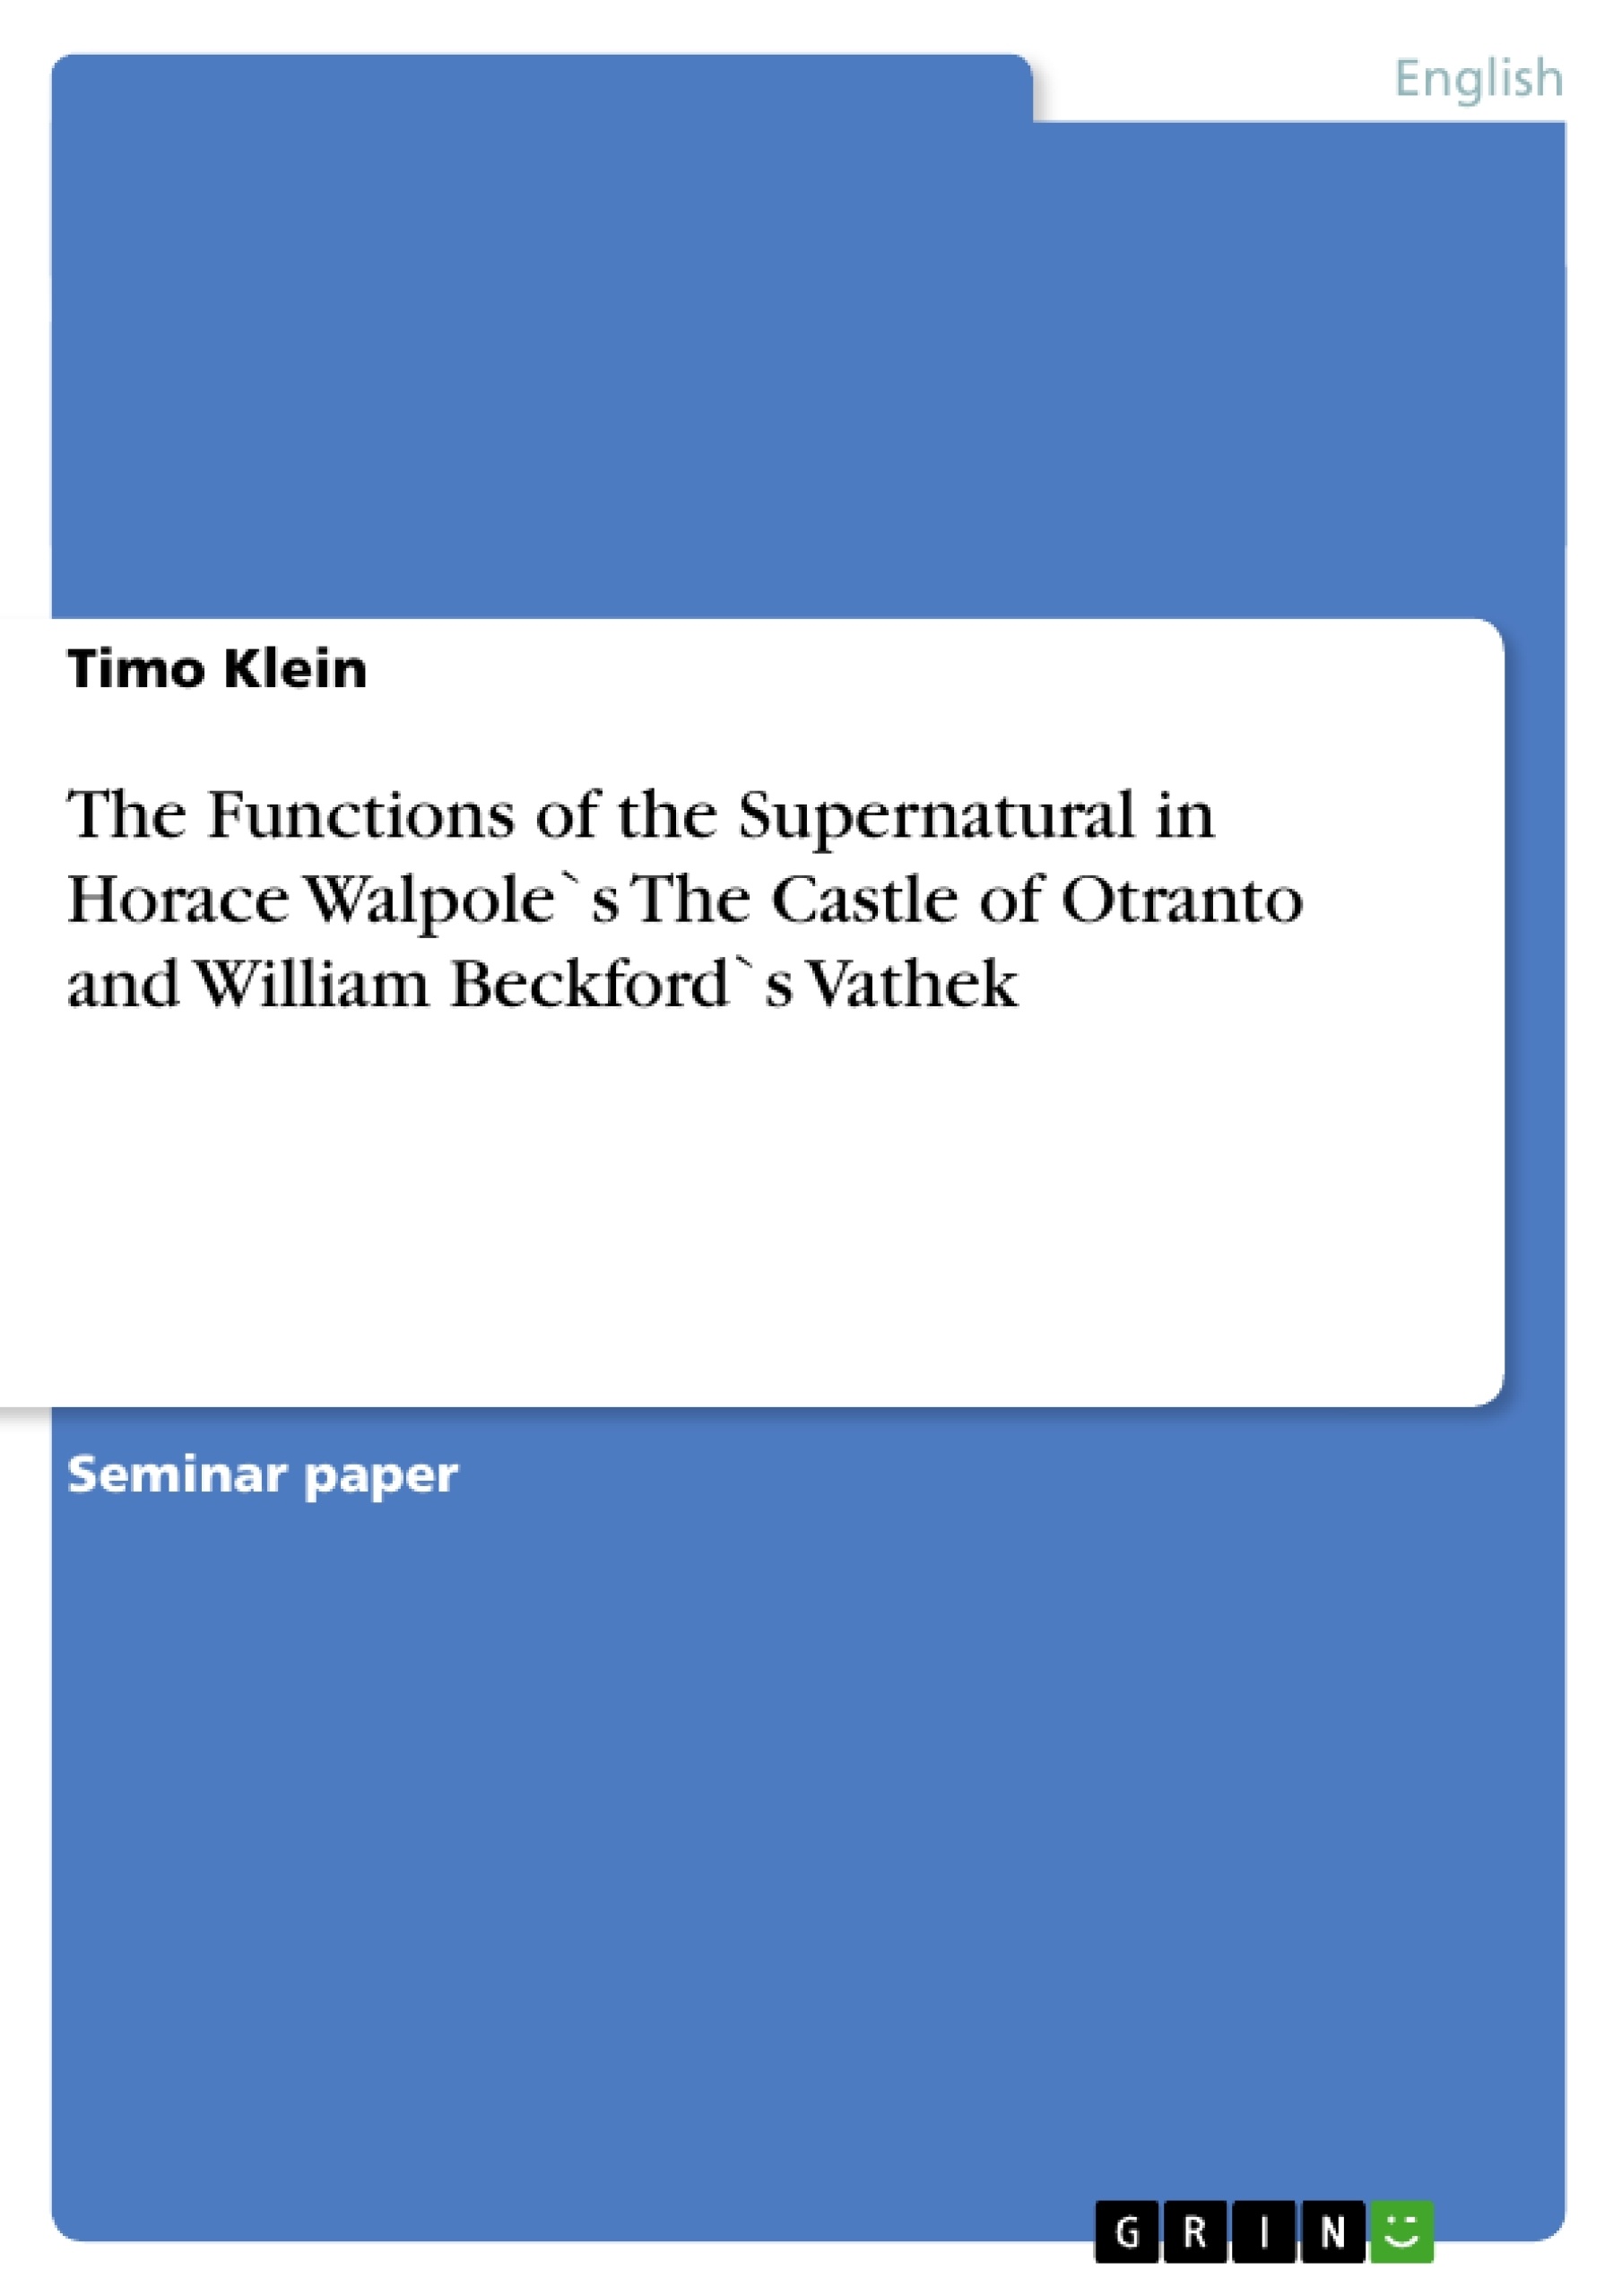 Title: The Functions of the Supernatural in Horace Walpole`s The Castle of Otranto and William Beckford`s Vathek